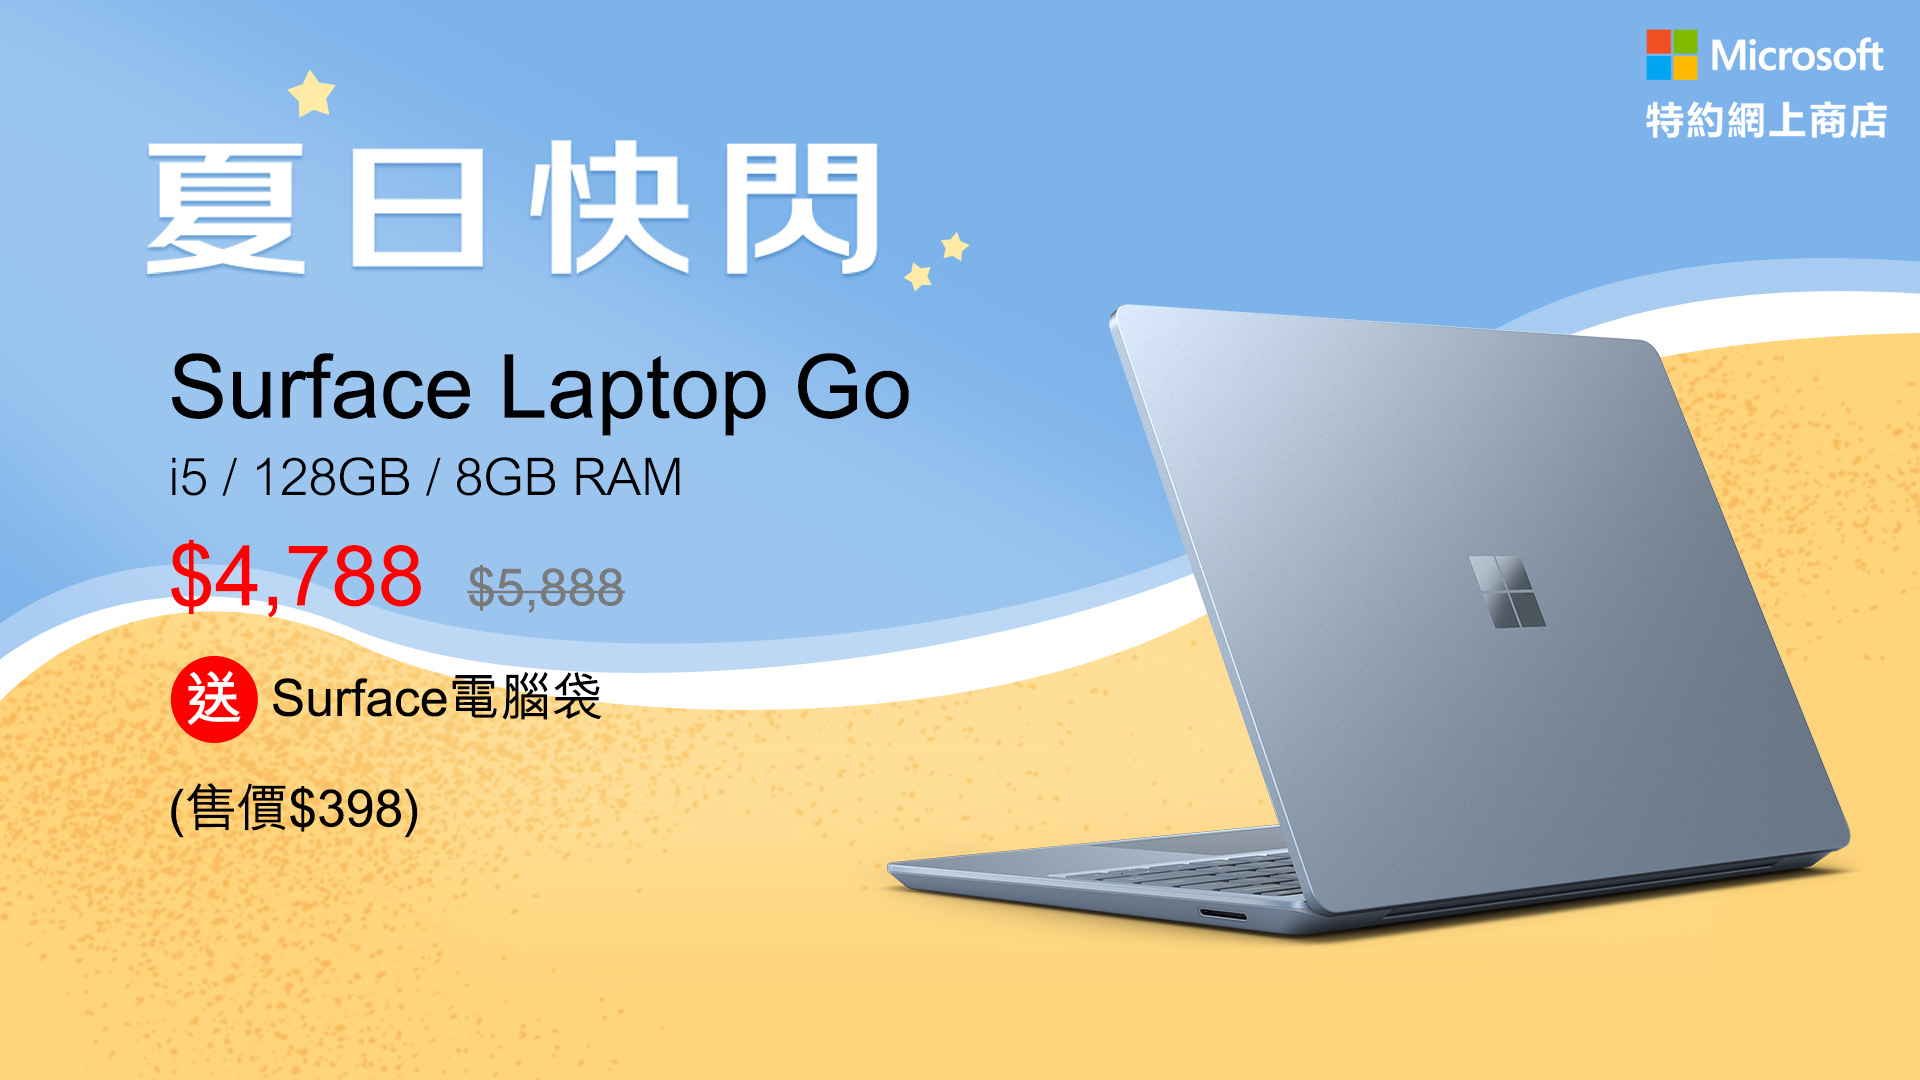 Surface Laptop Go off HK$1,100 and free laptop bag